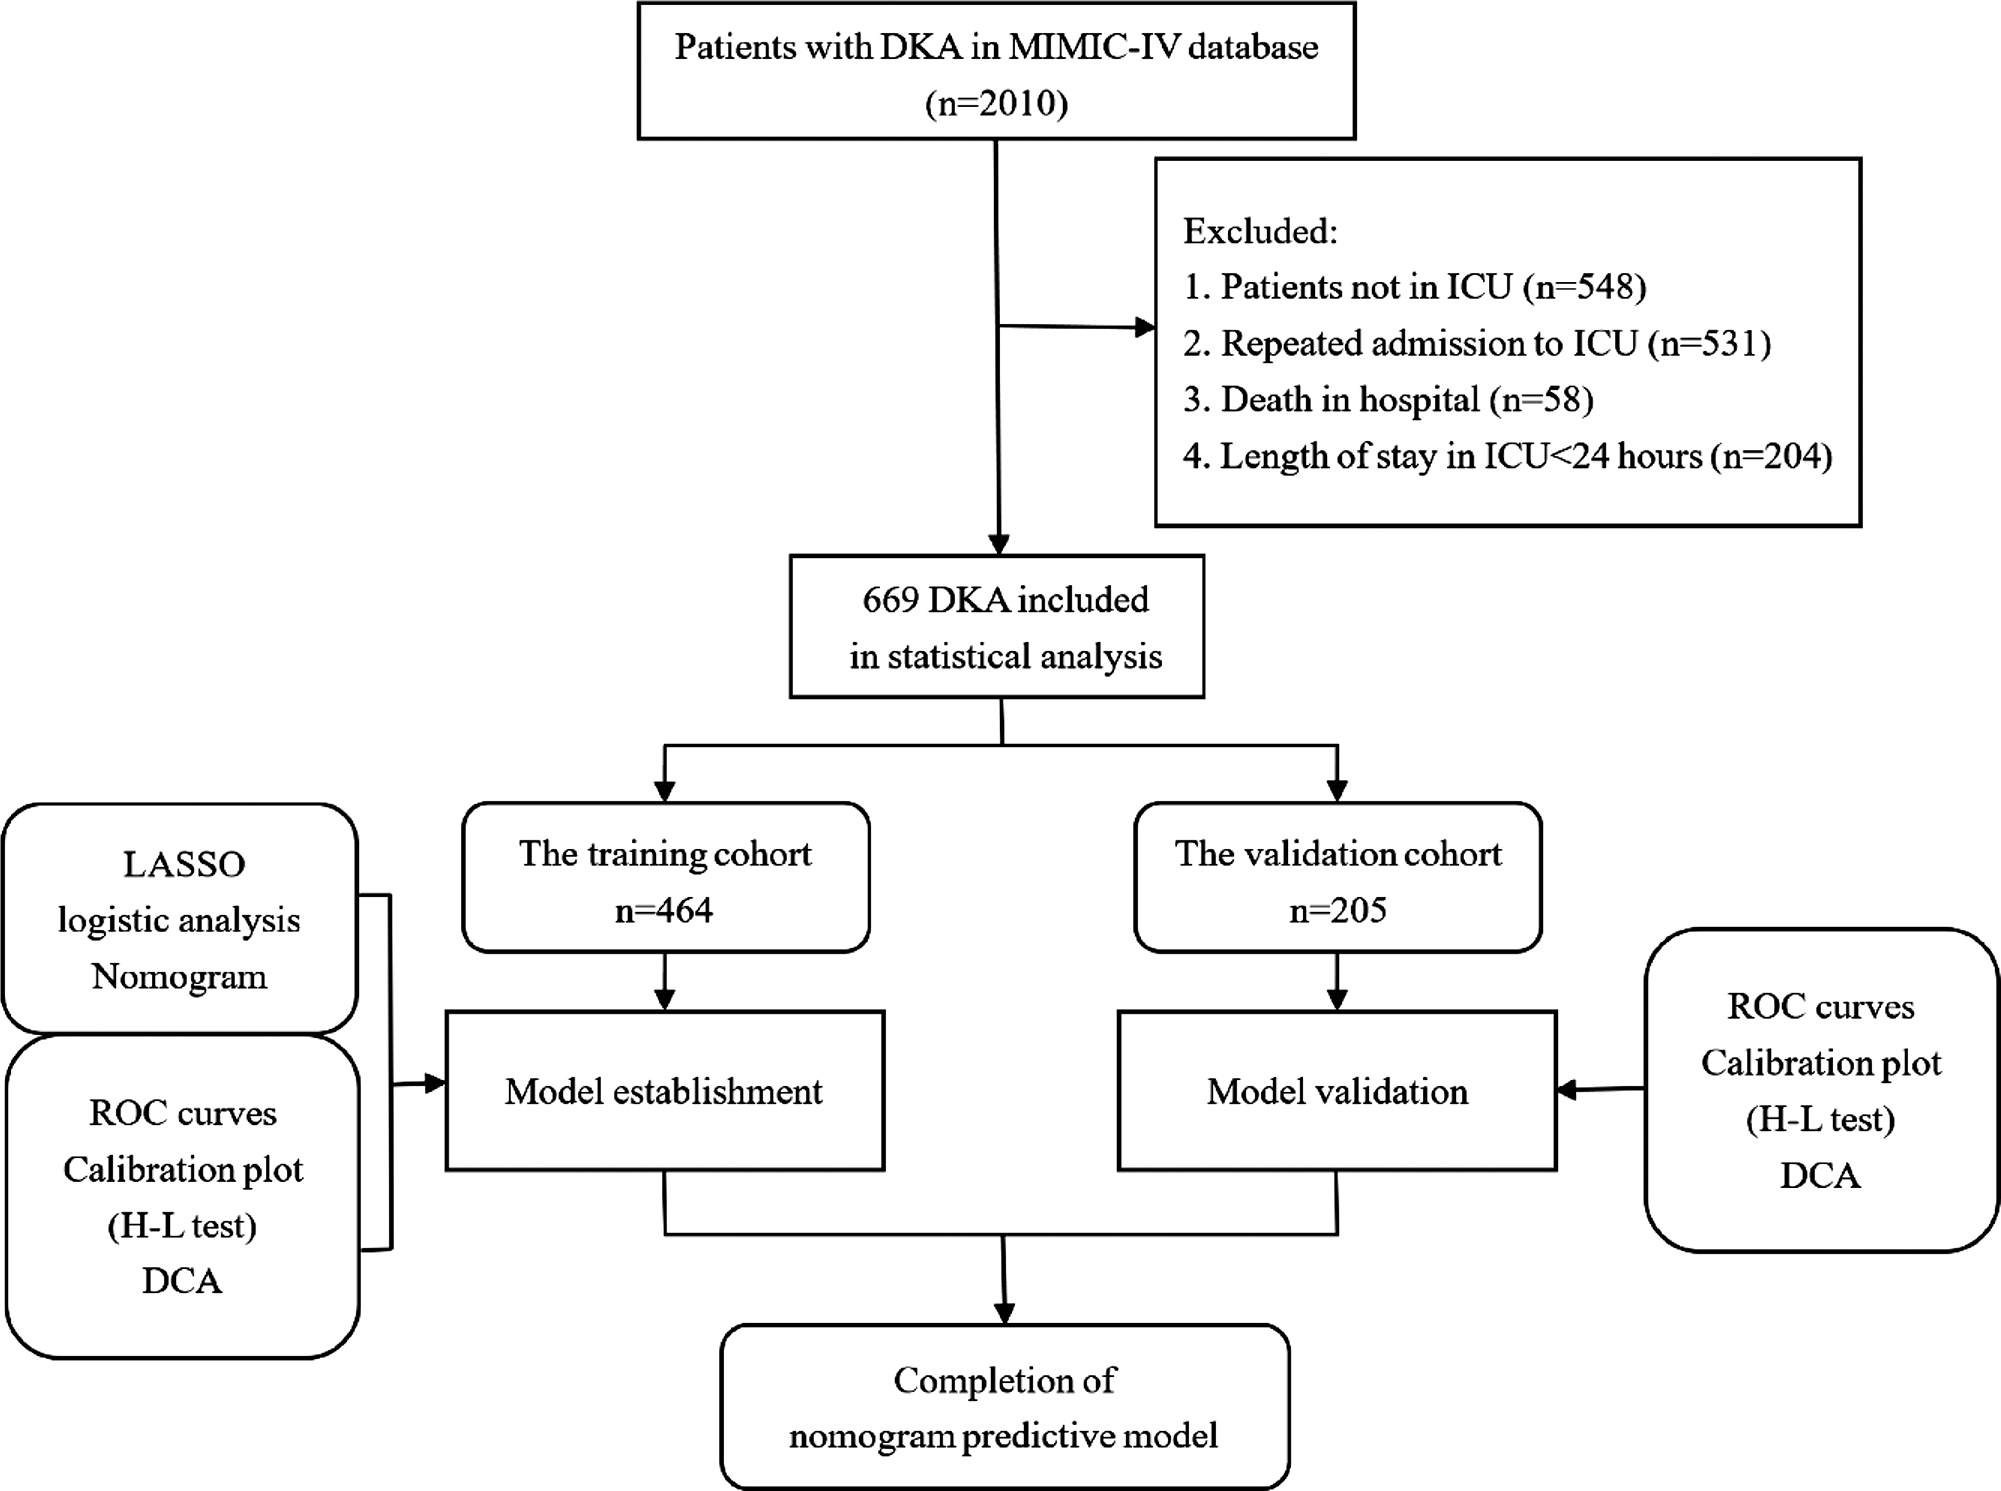 Clinical nomogram prediction model to assess the risk of prolonged ICU length of stay in patients with diabetic ketoacidosis: a retrospective analysis based on the MIMIC-IV database